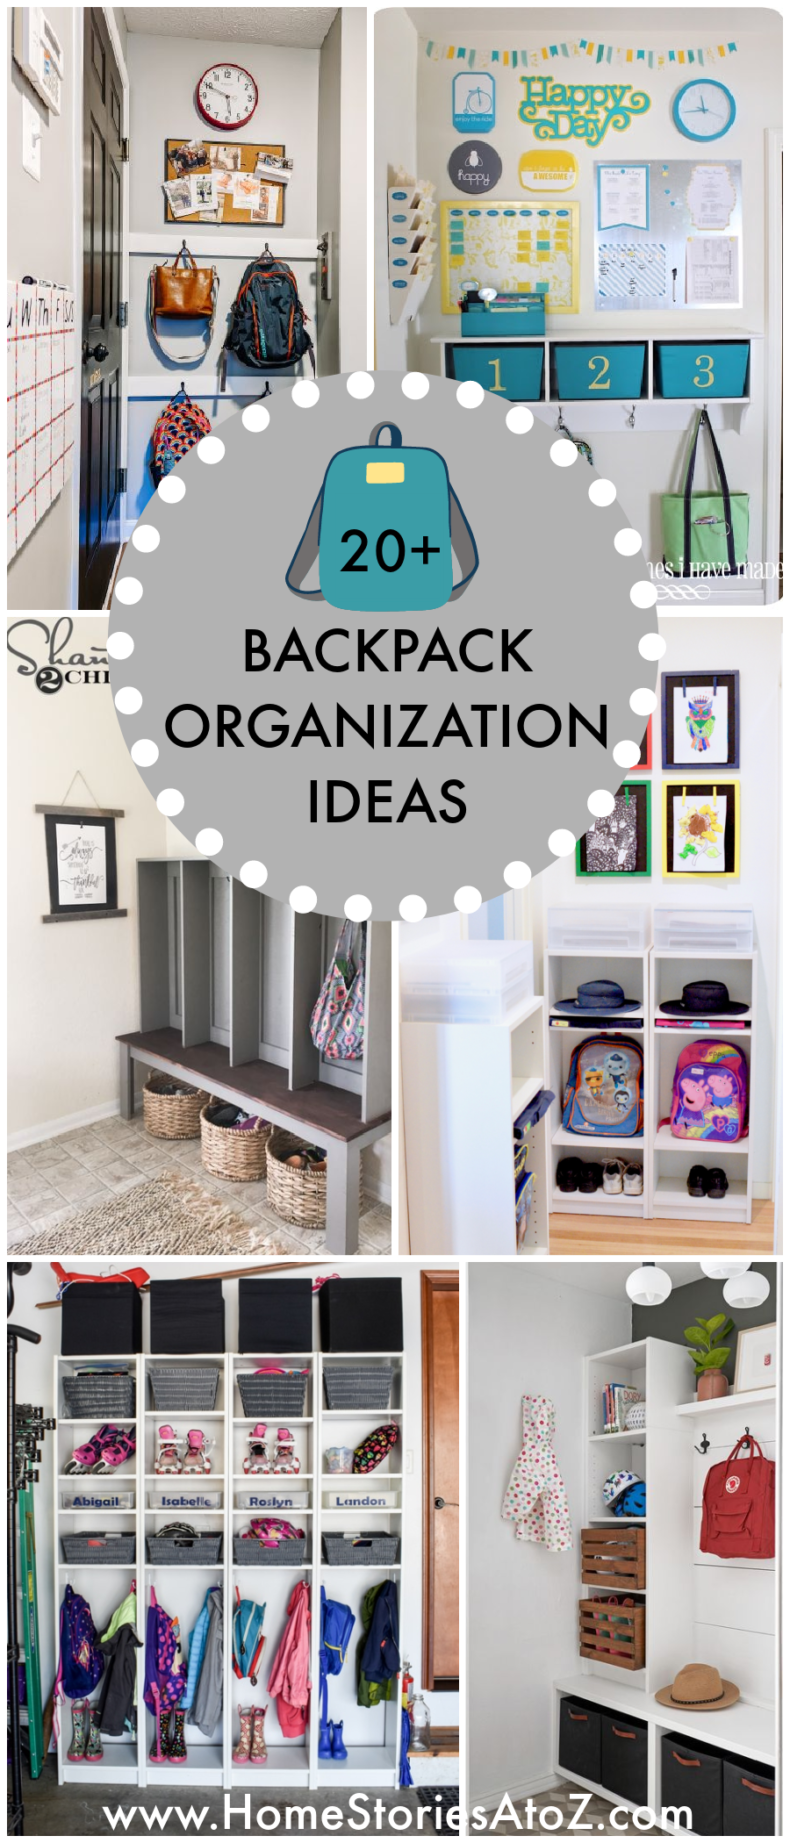 Backpack Organization Ideas - Home Stories A to Z